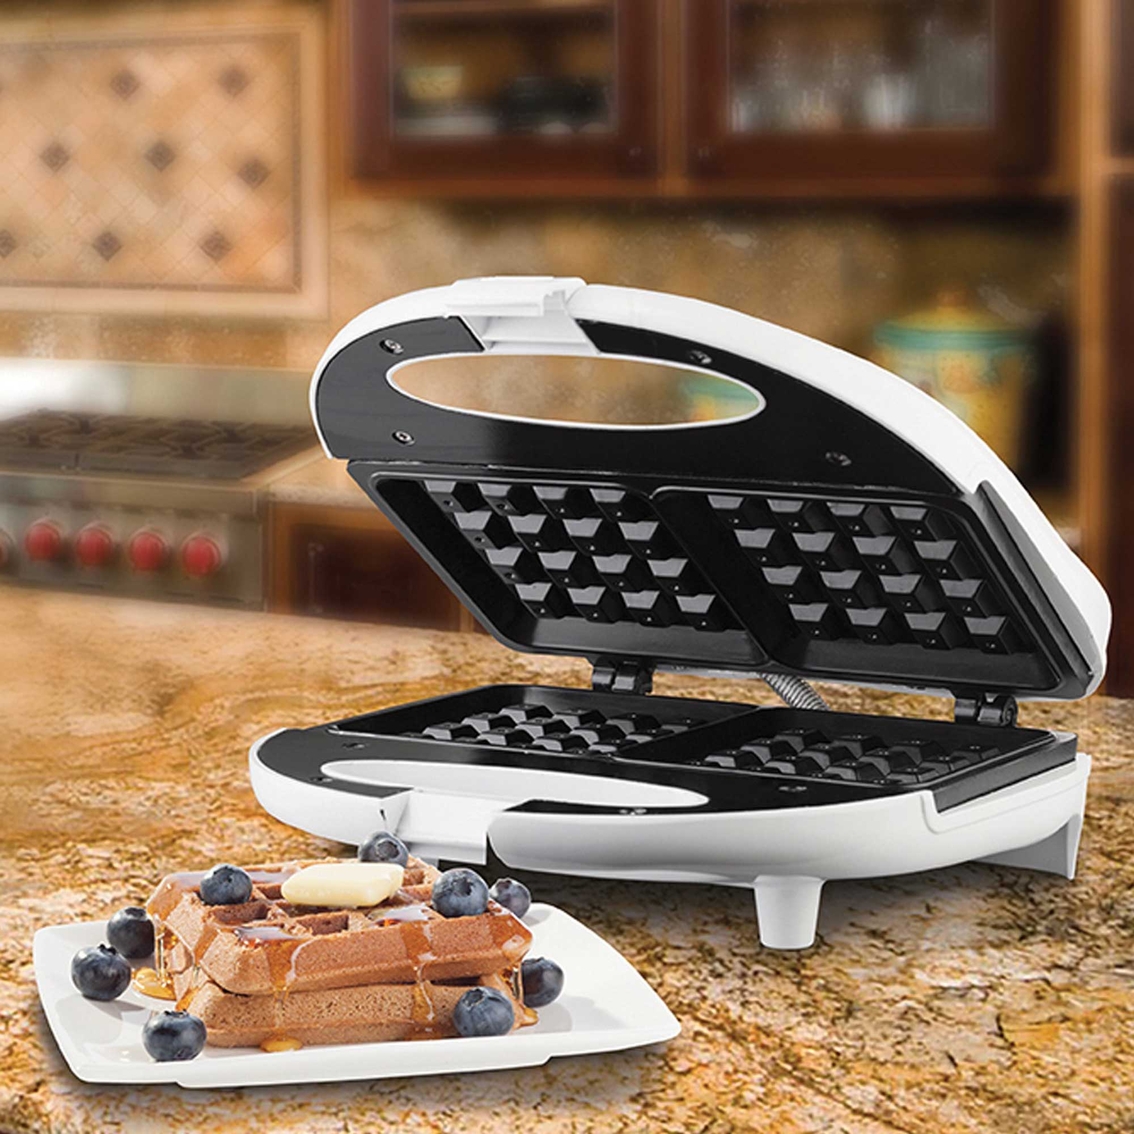 Brentwood Nonstick Dual Waffle Maker - Image 7 of 7